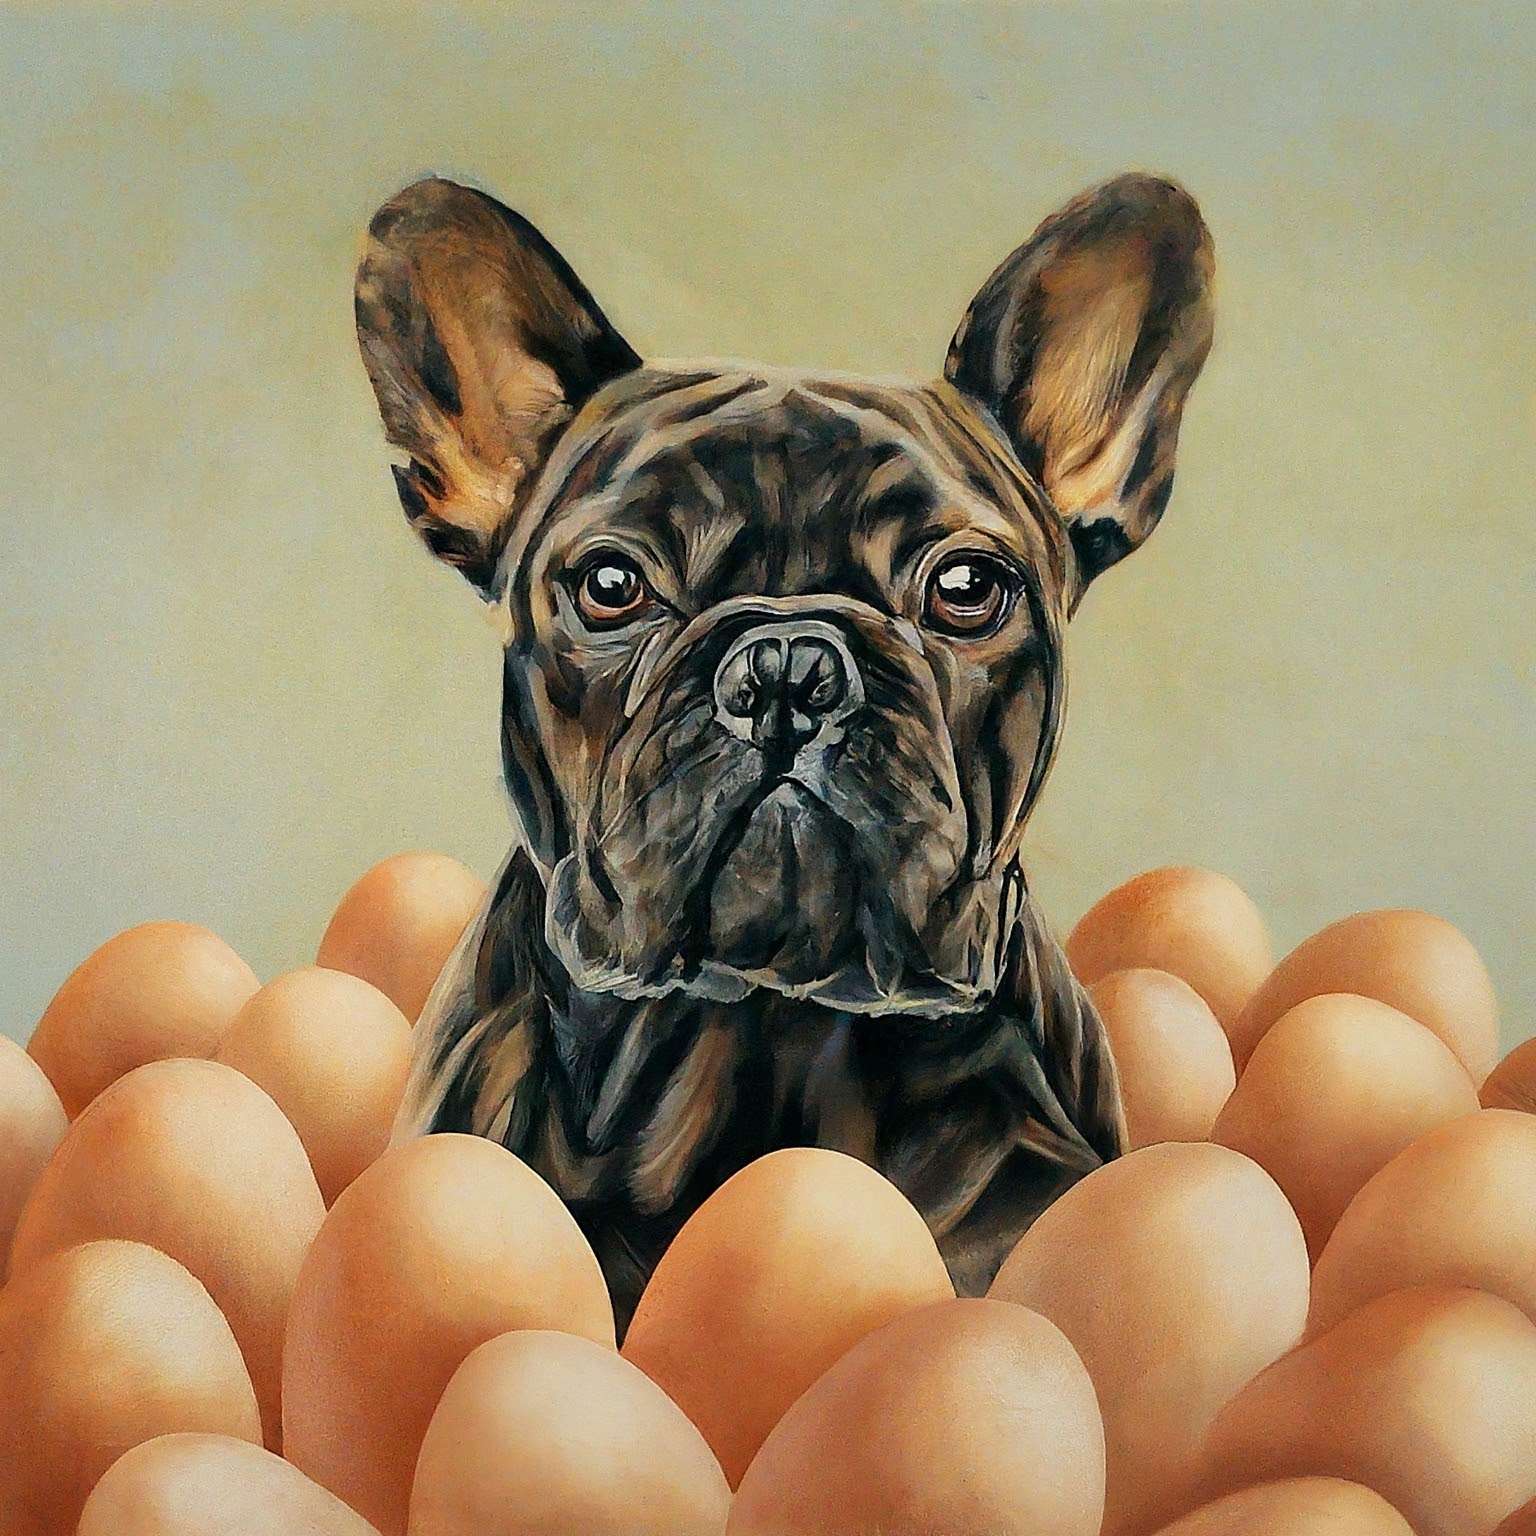 dog in the middle of eggs - Os cães podem comer ovos - Can dogs eat eggs?